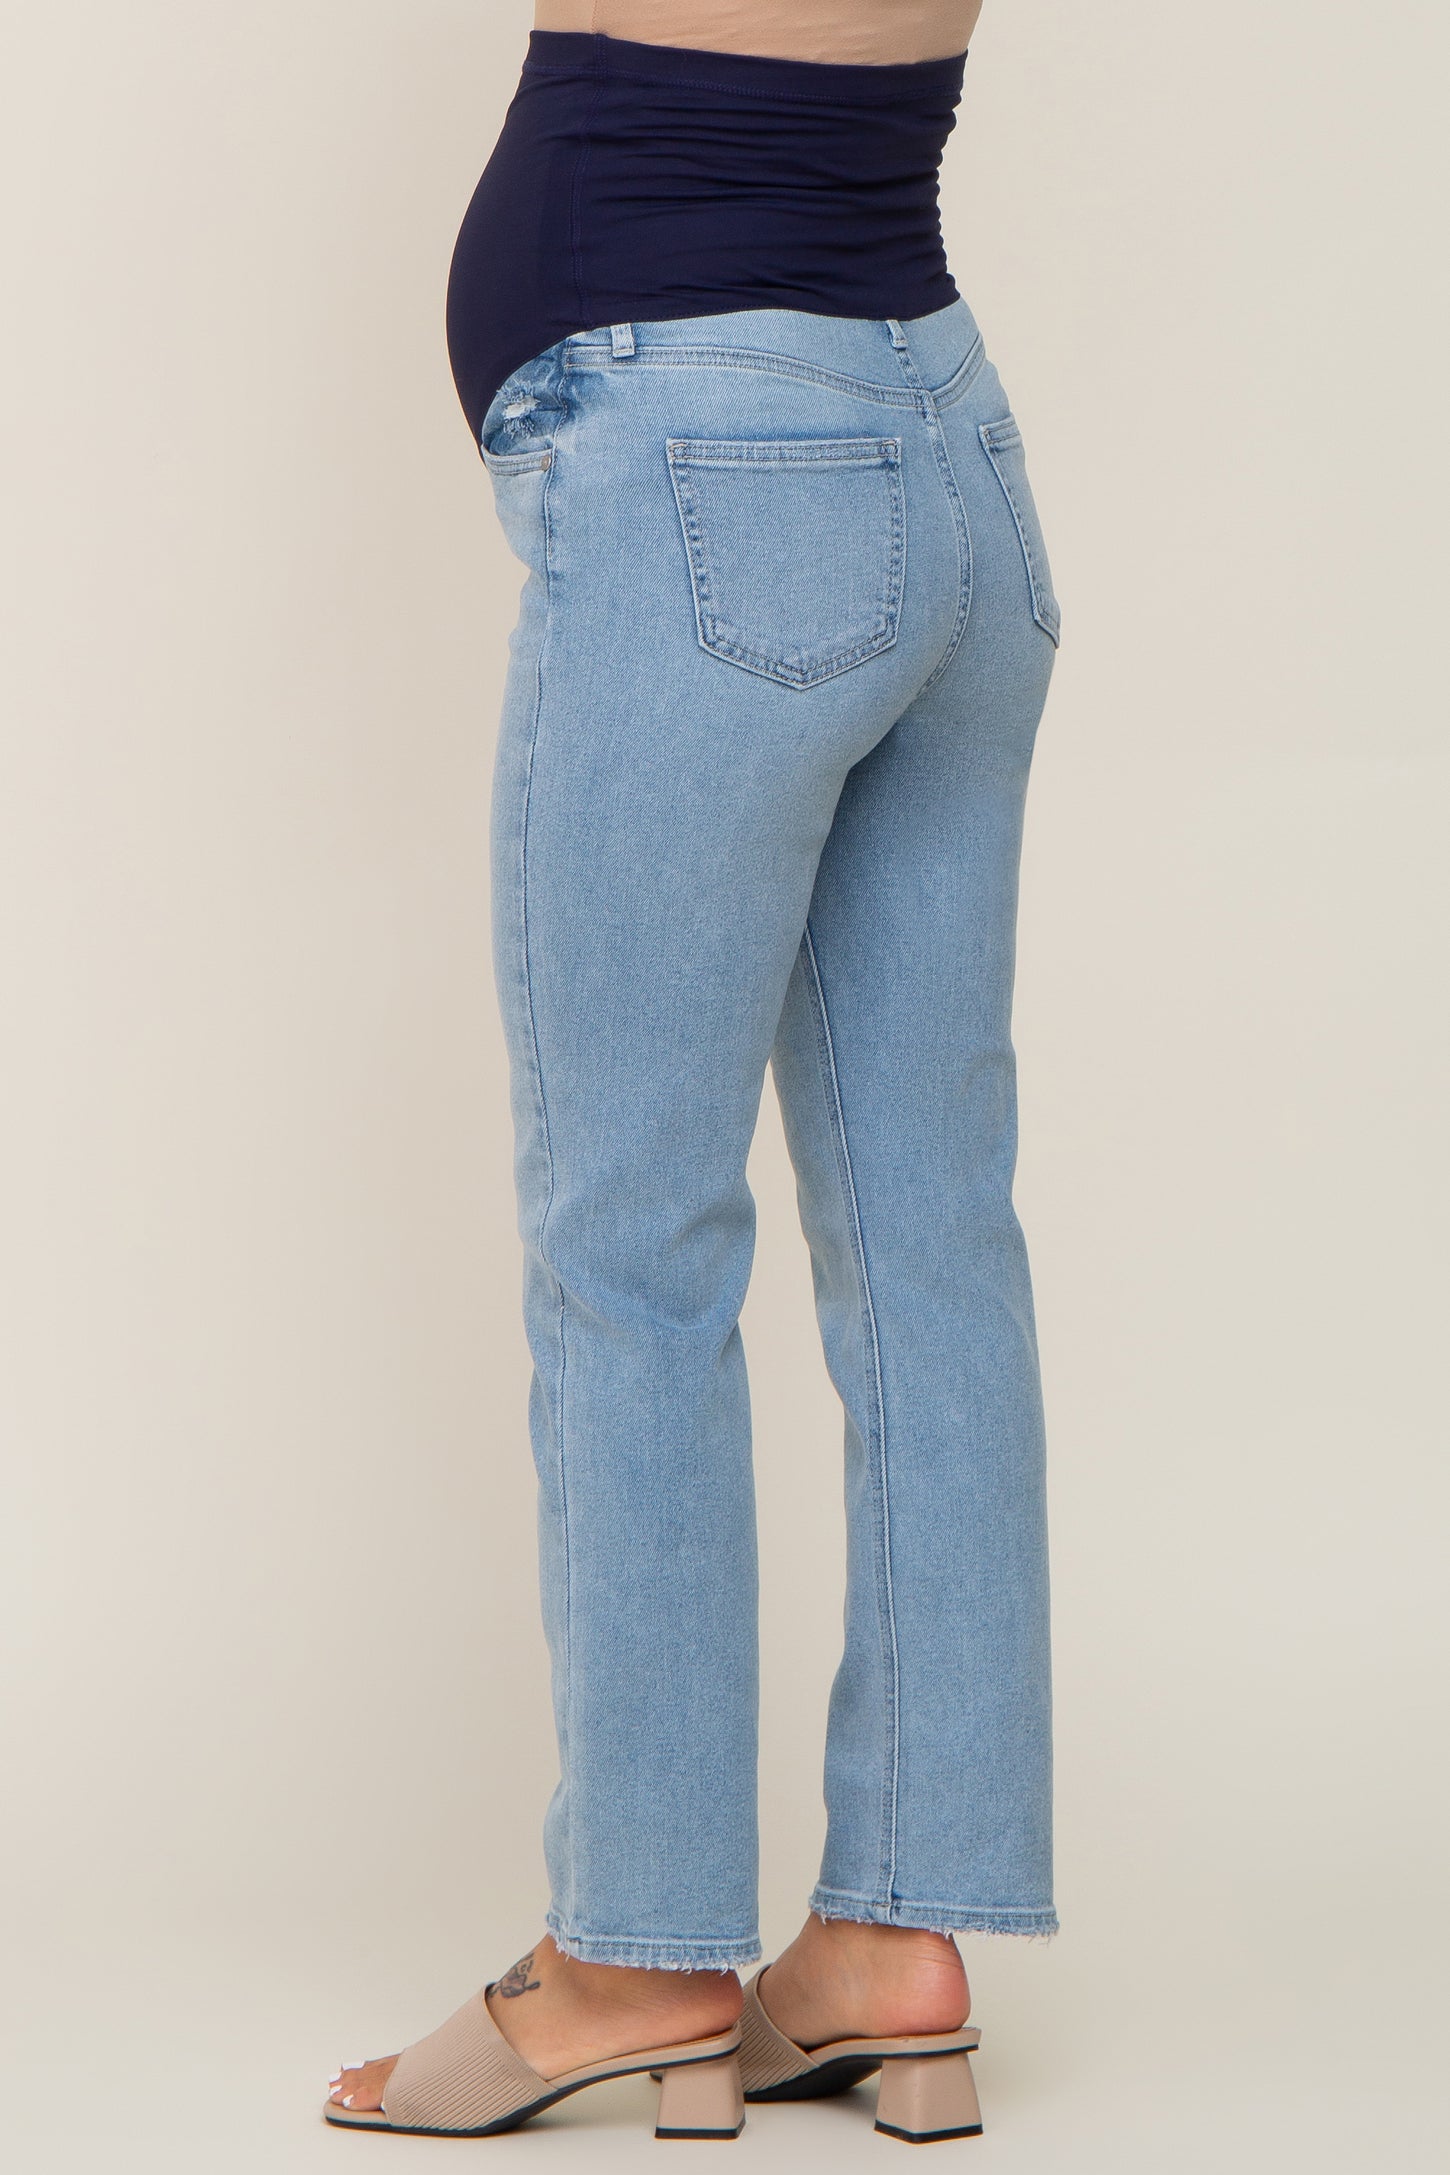 Light Wash Skinny Straight Cropped Maternity Jeans